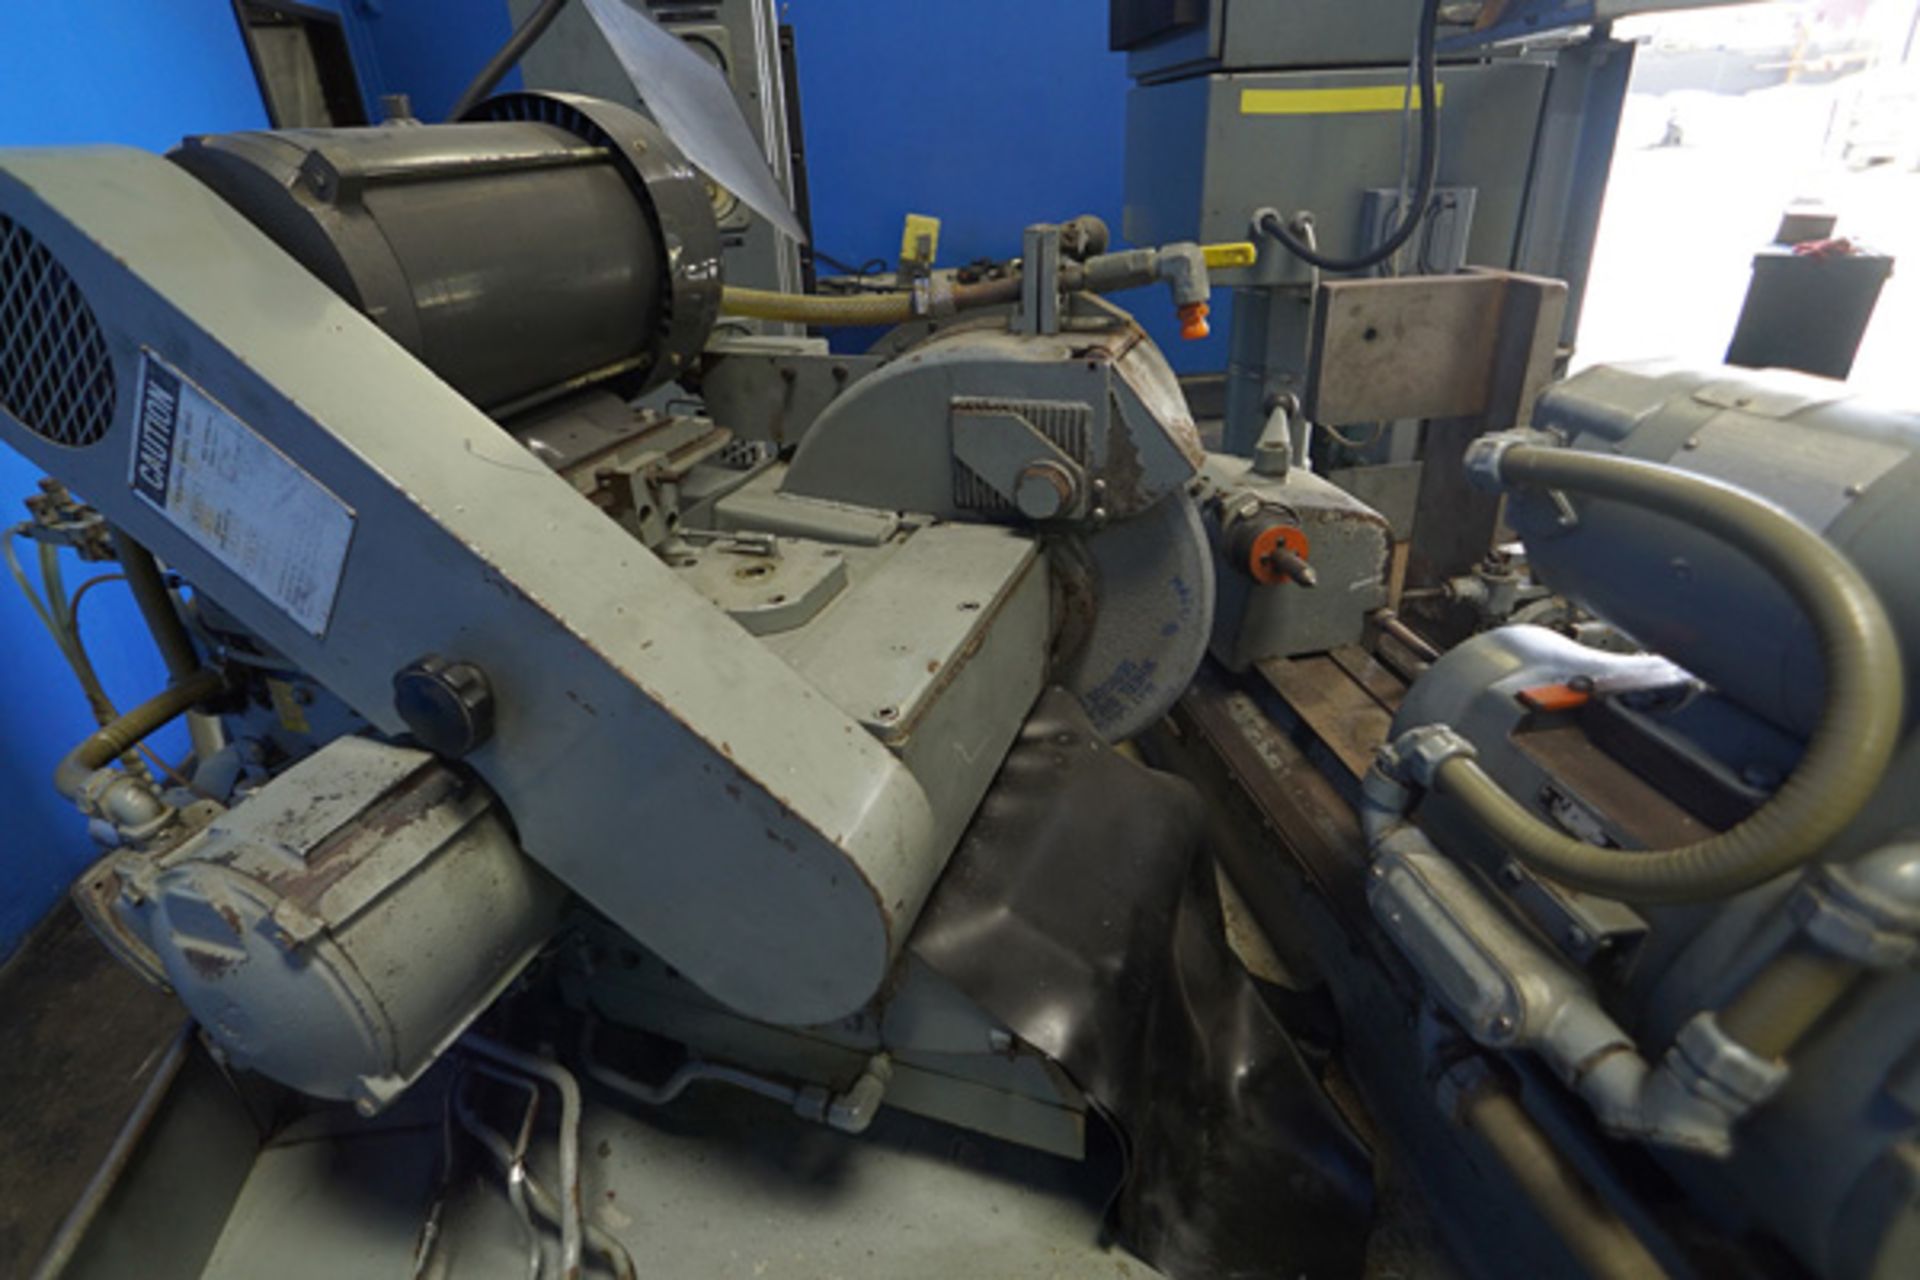 1973 Landis Angle Head Cylindrical Grinder | 10" x 20", Mdl: 1R, S/N: T-884-73 - 5040HP - Image 5 of 9